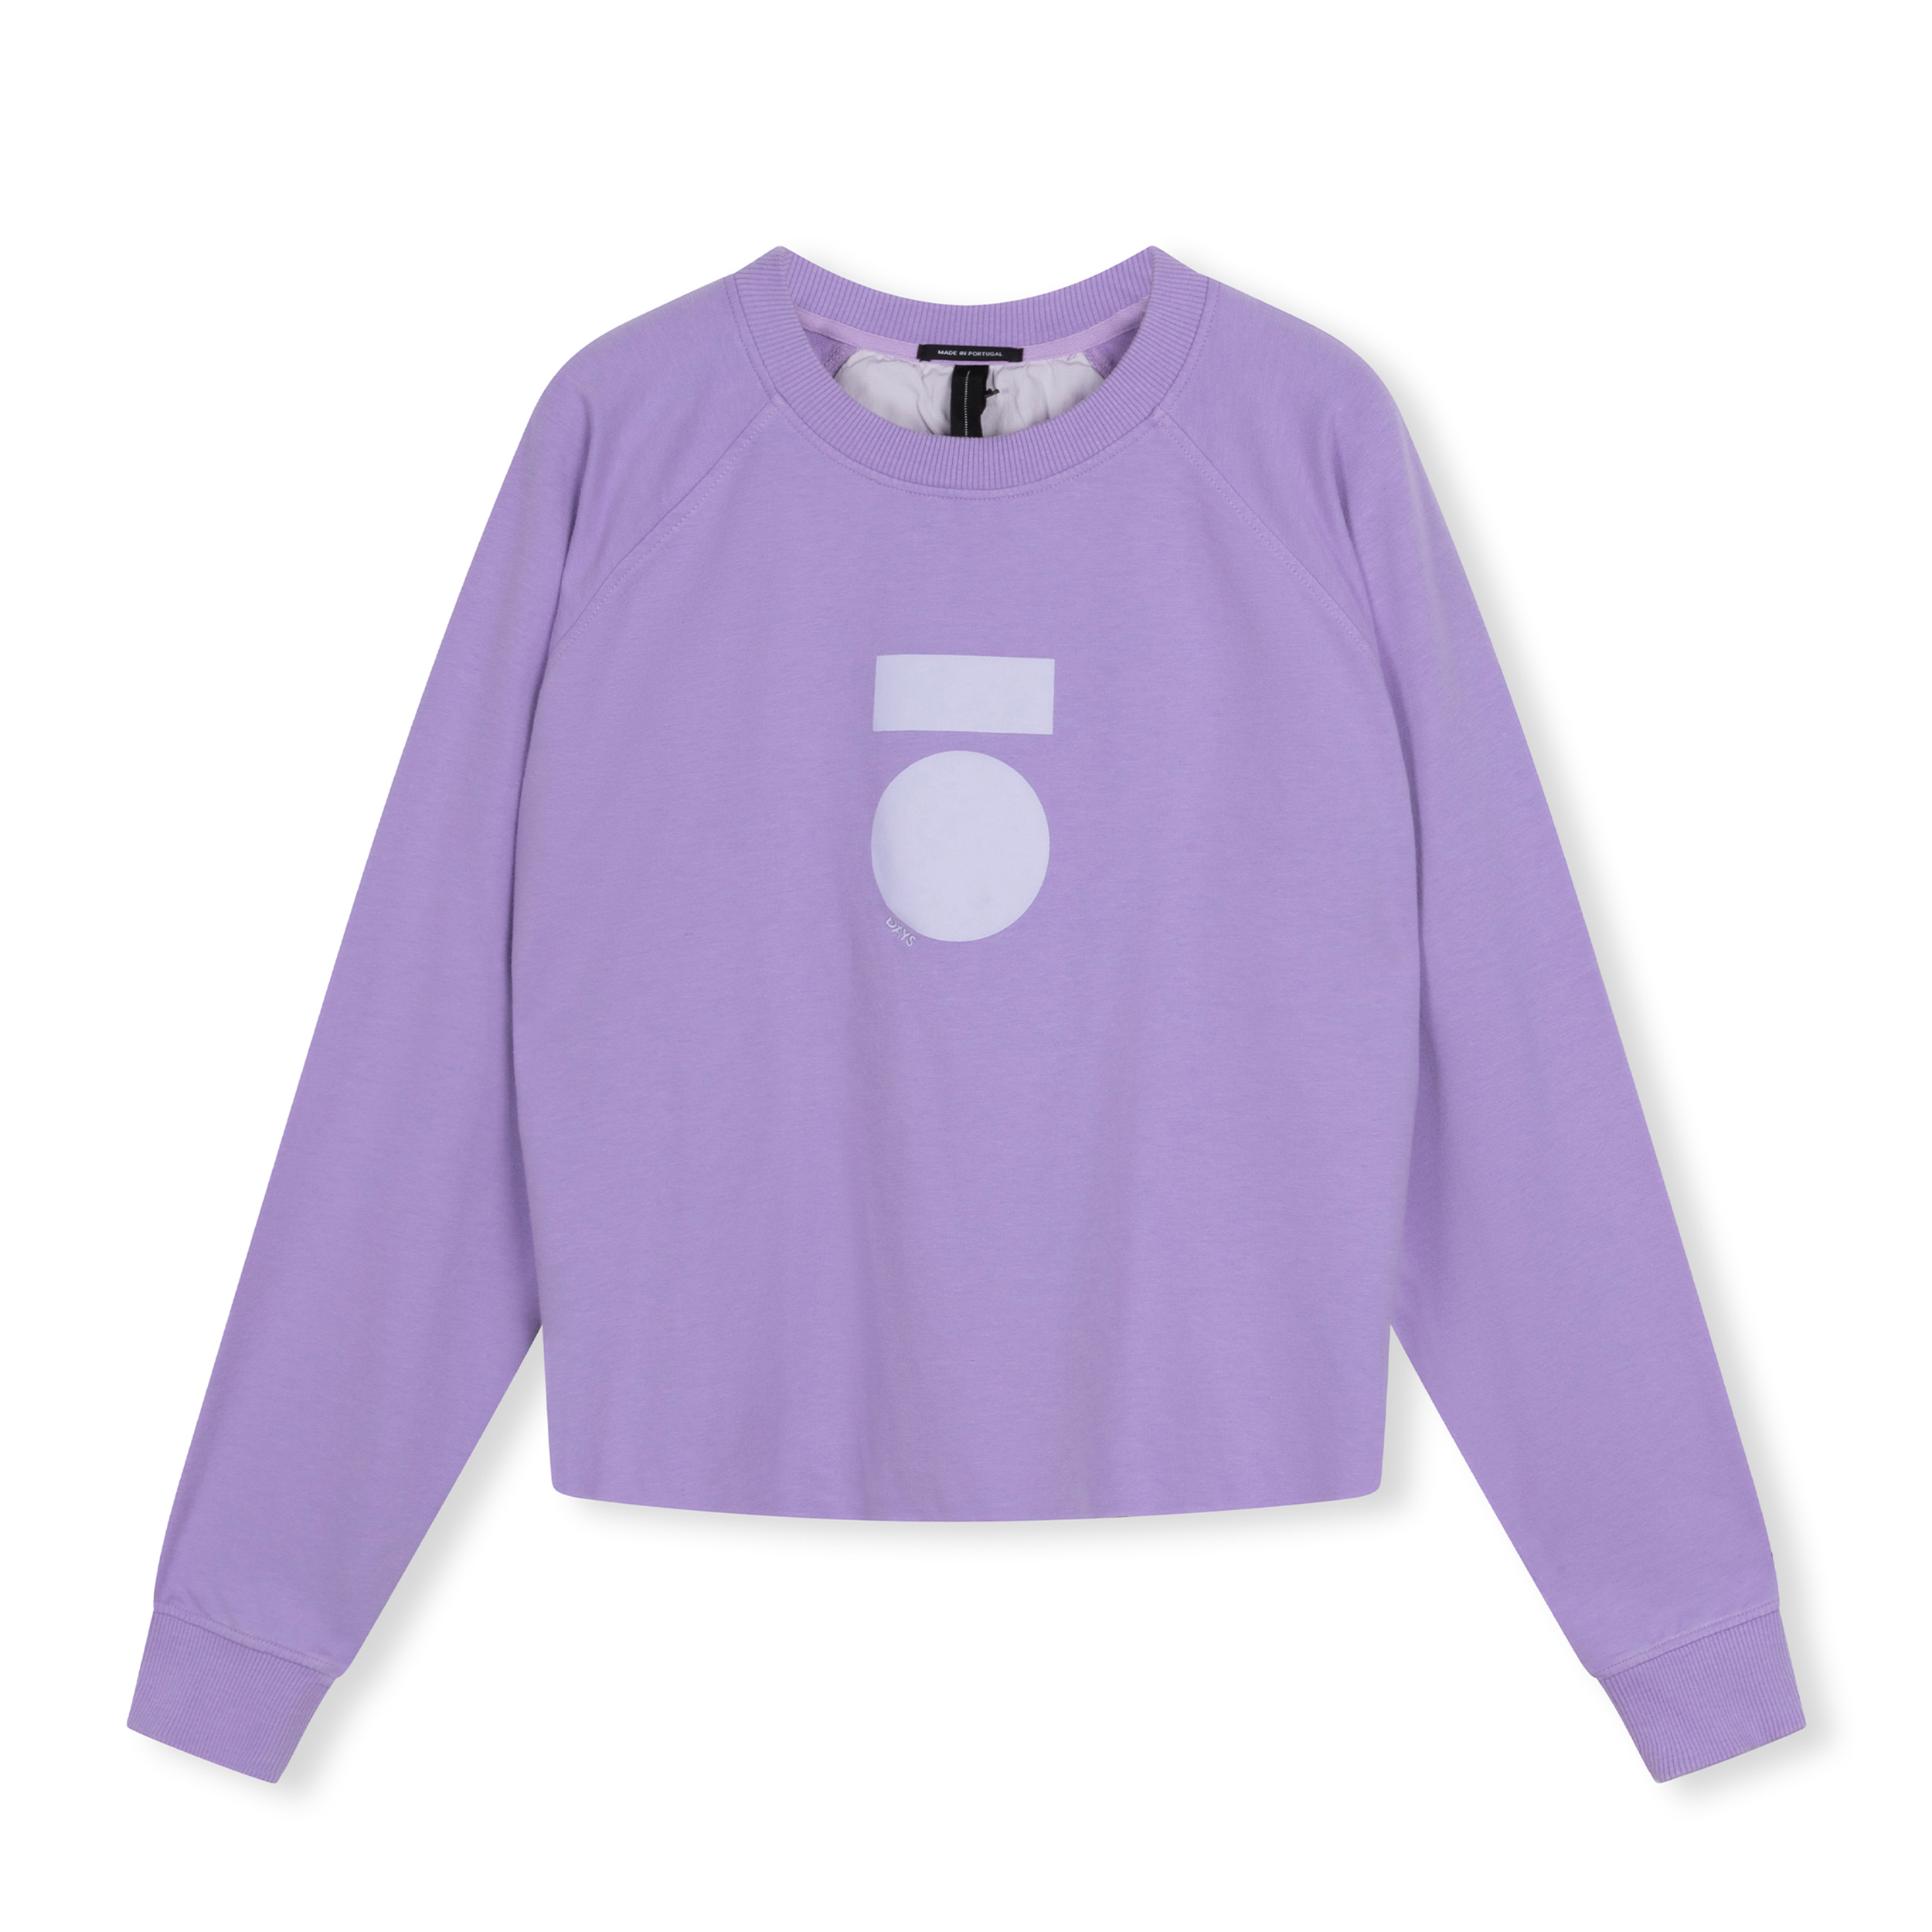 10Days cropped icon sweater lilac